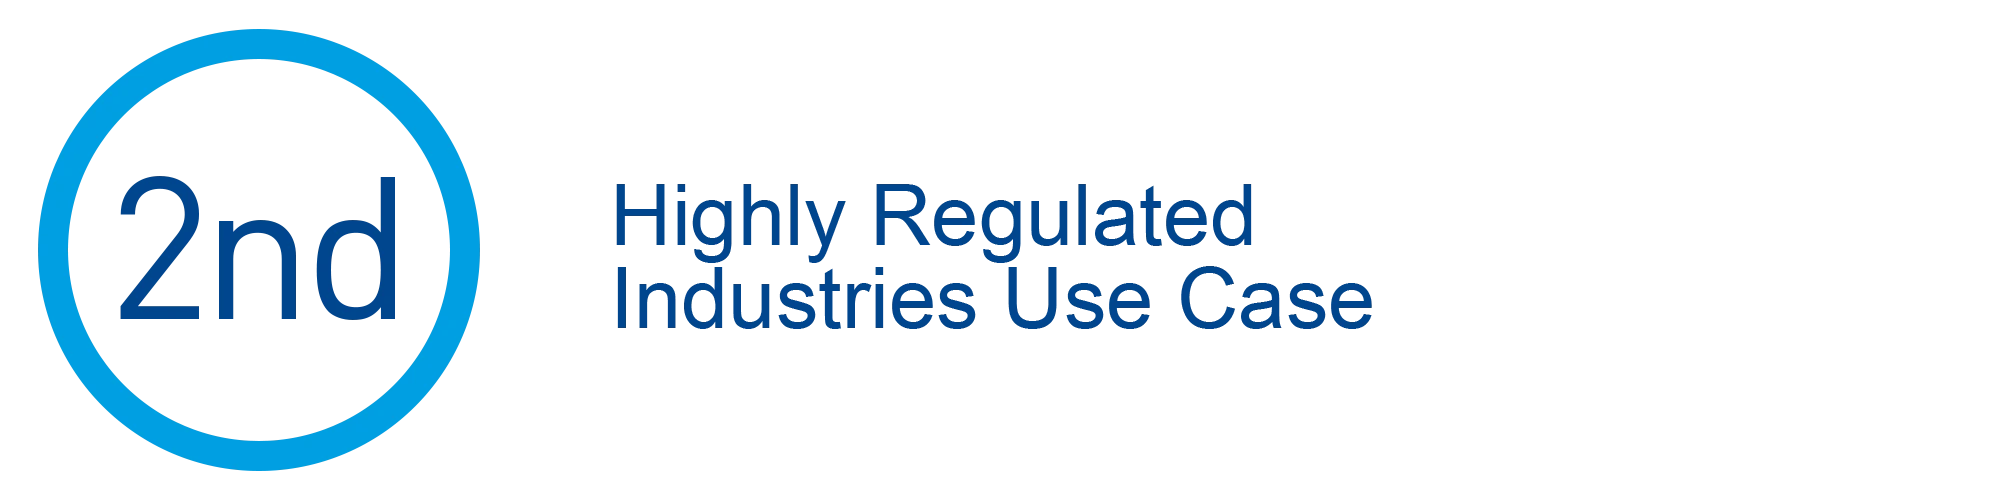 2nd Highly Regulated Industries